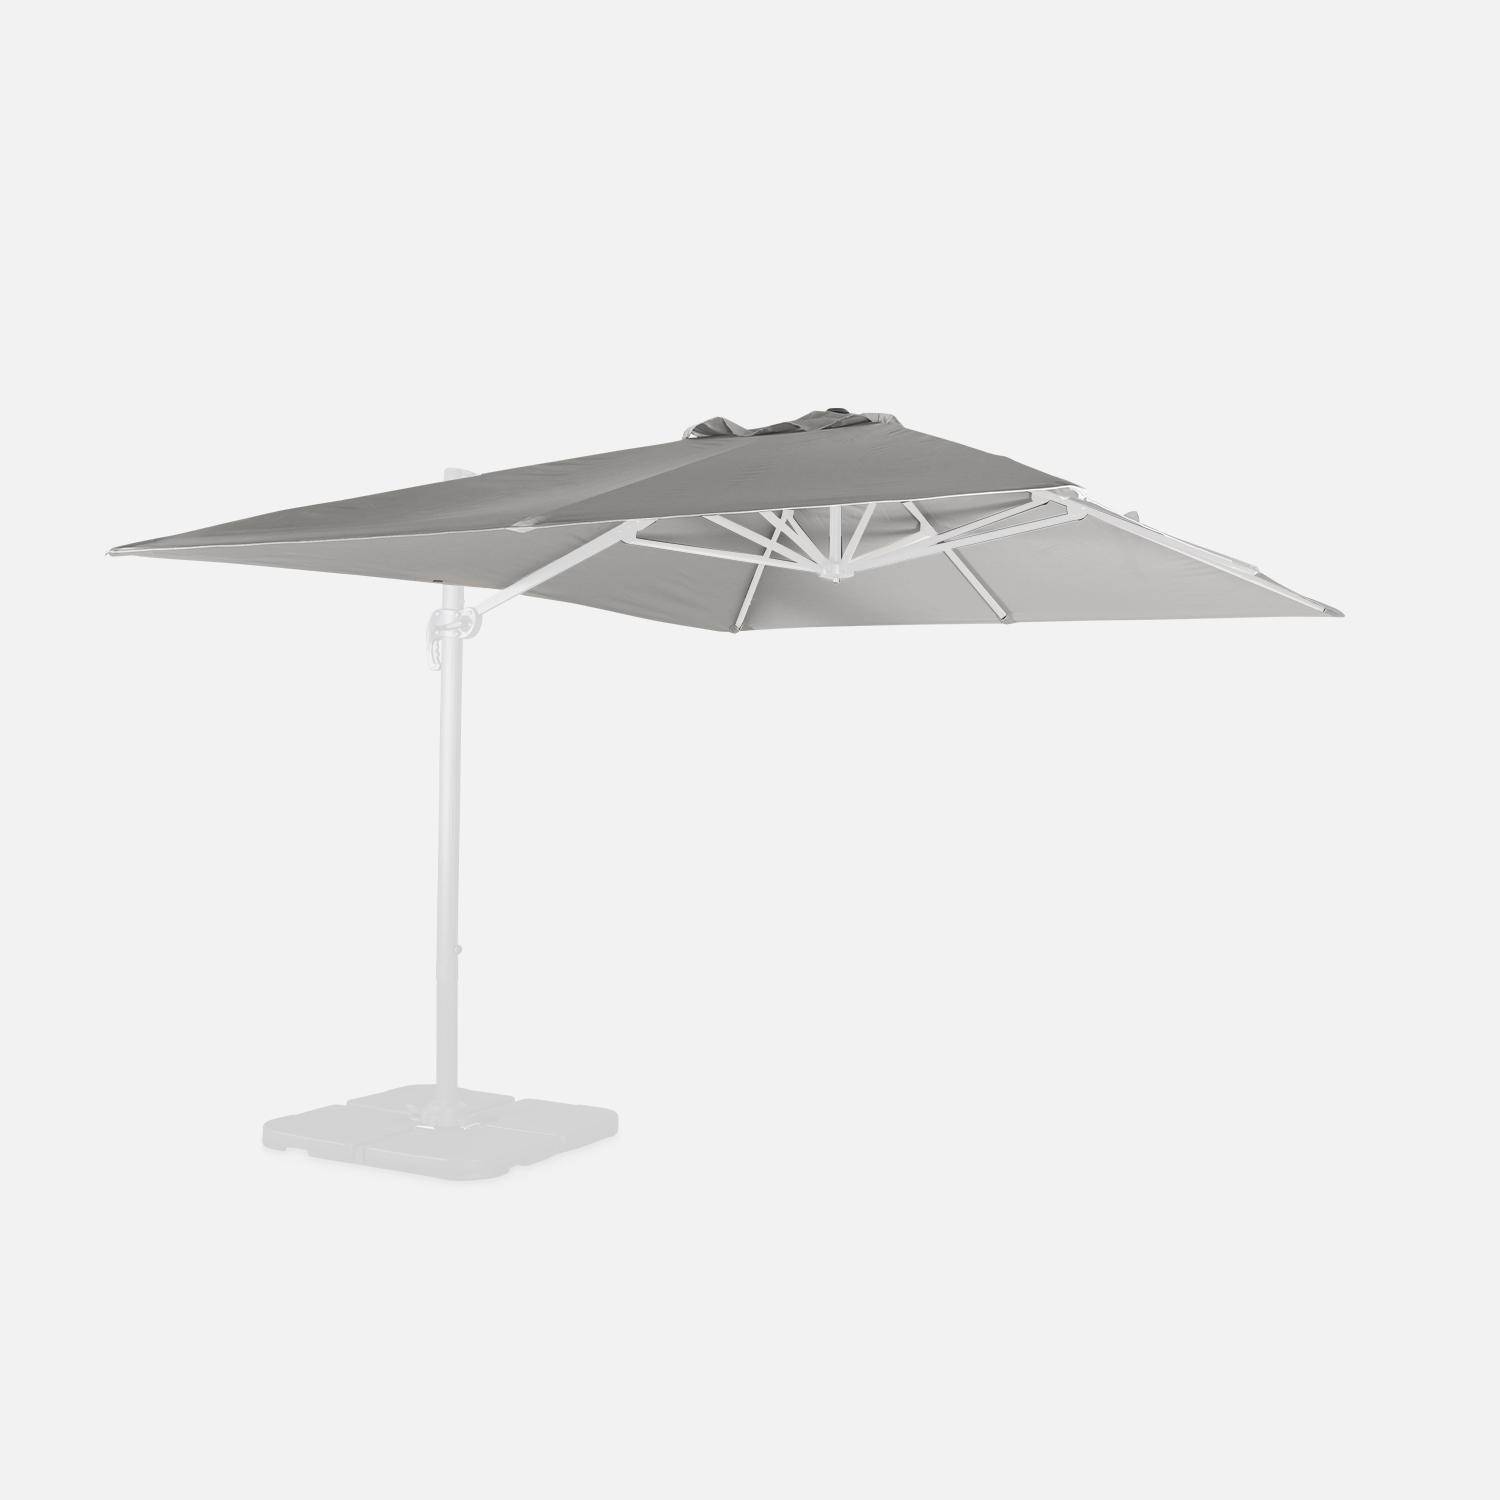 Wimereux Replacement Canopy, 300x400cm, GREY,sweeek,Photo1